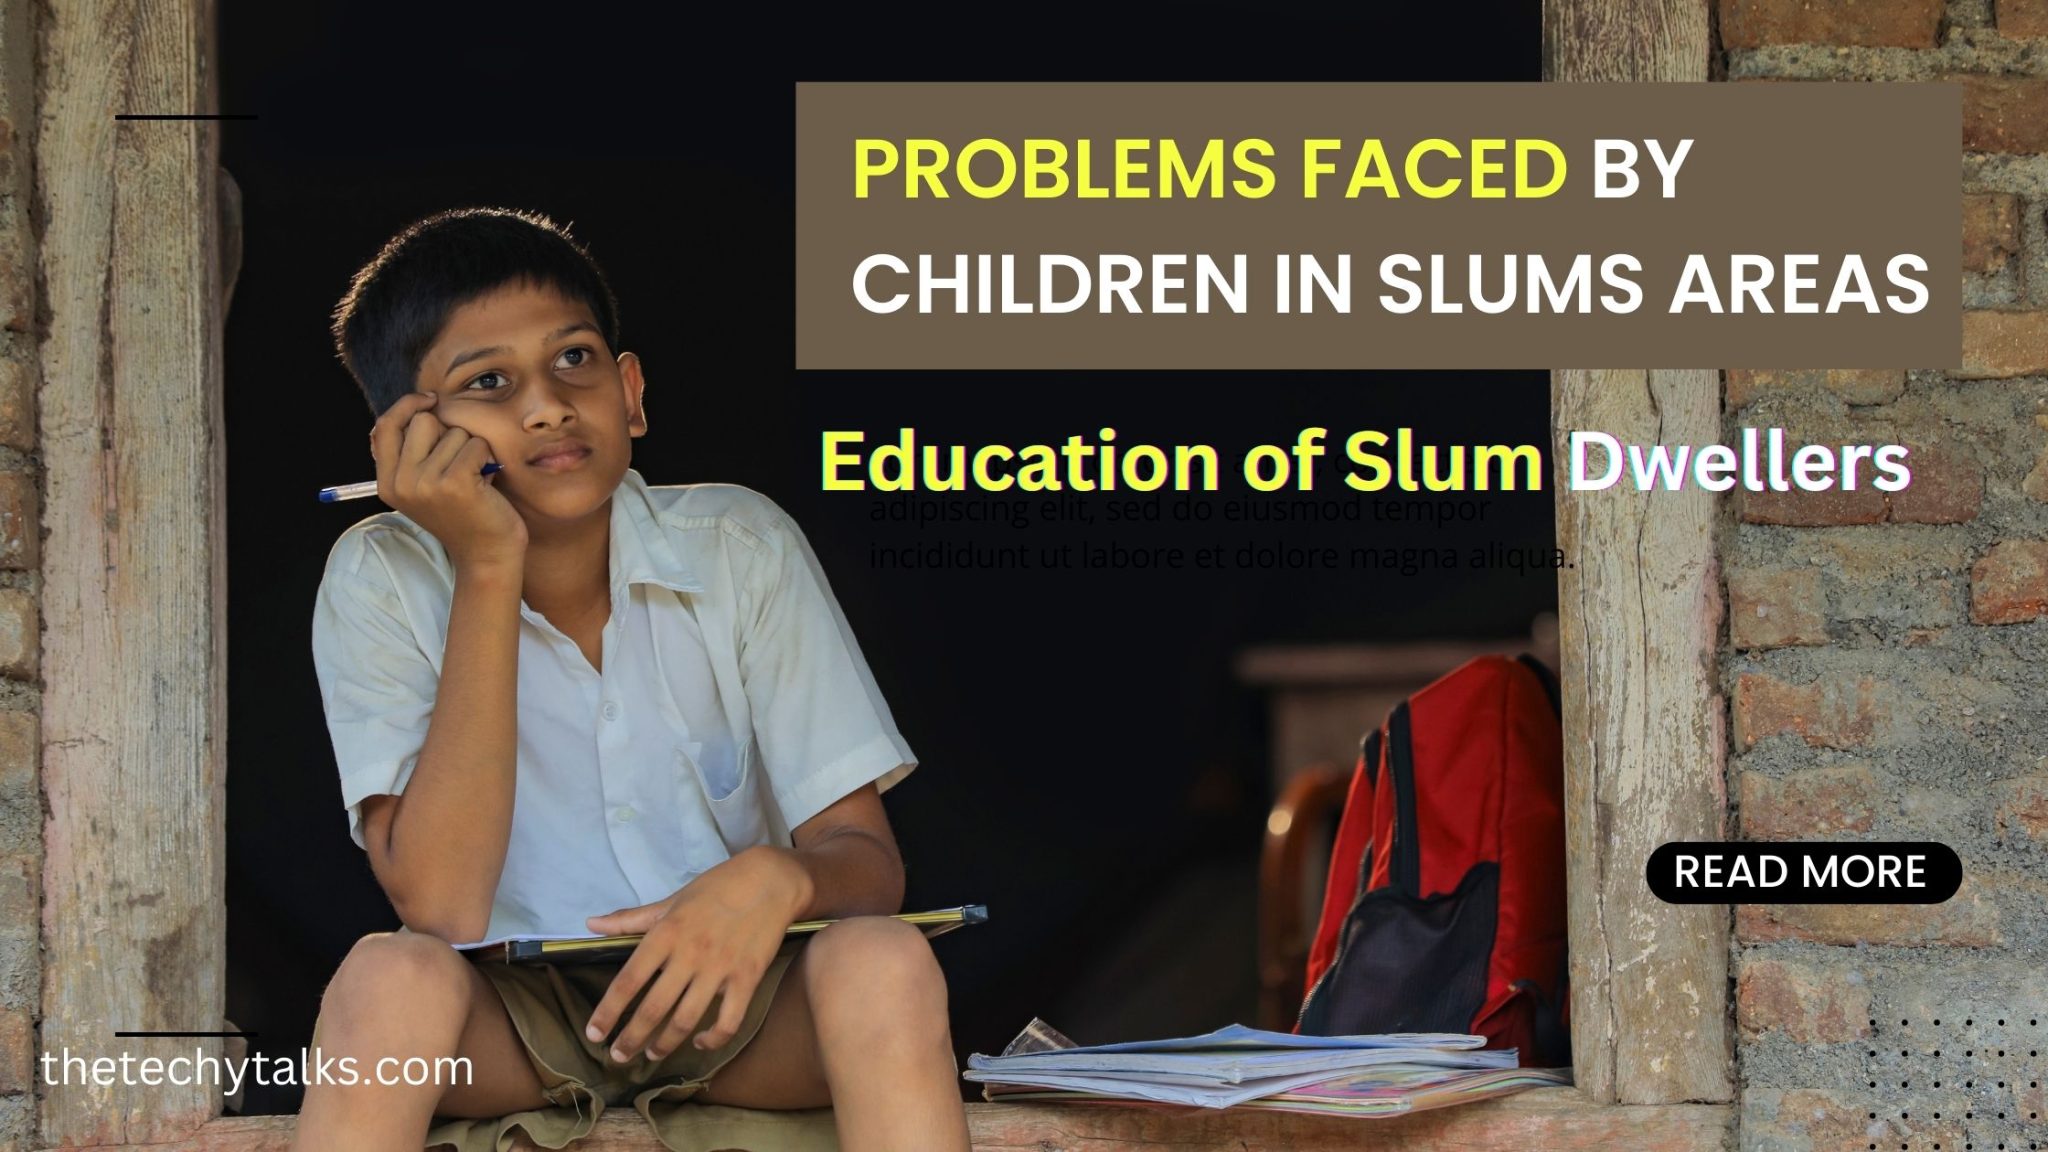 Problems Faced by Children in Slums Areas | Education of Slum Dwellers